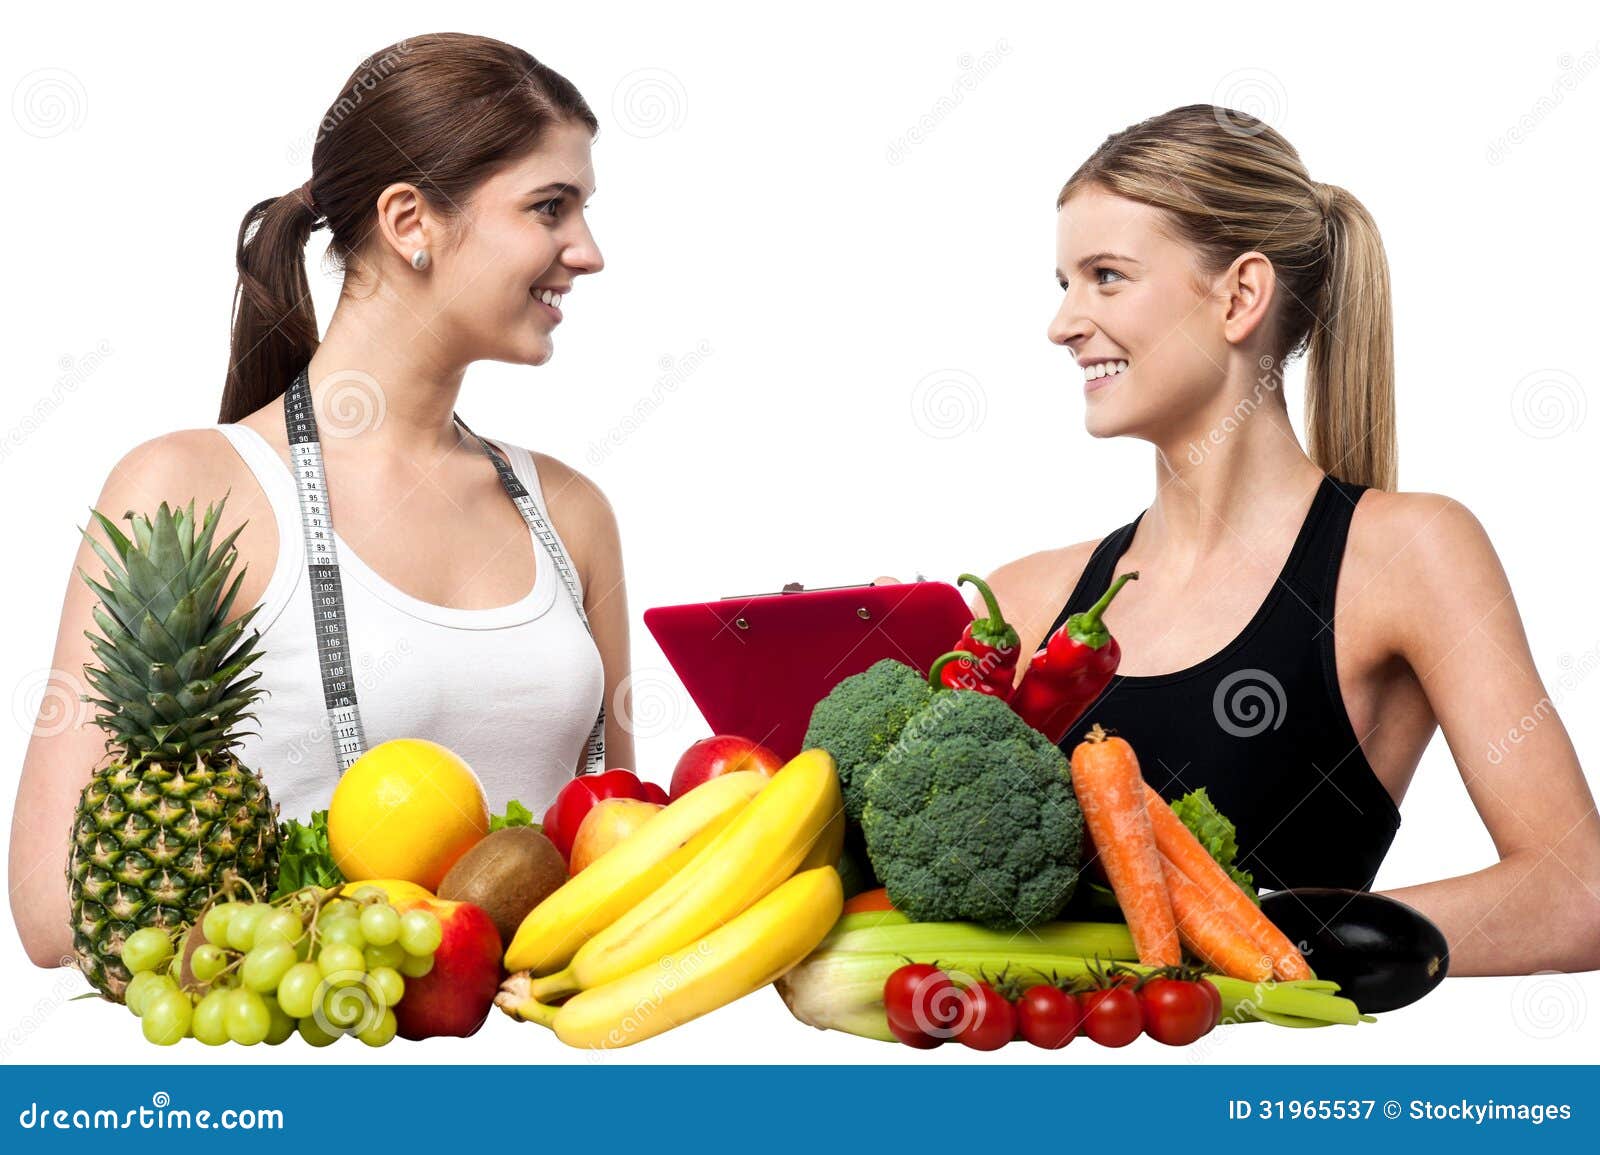 health experts. fresh fruits and vegetables